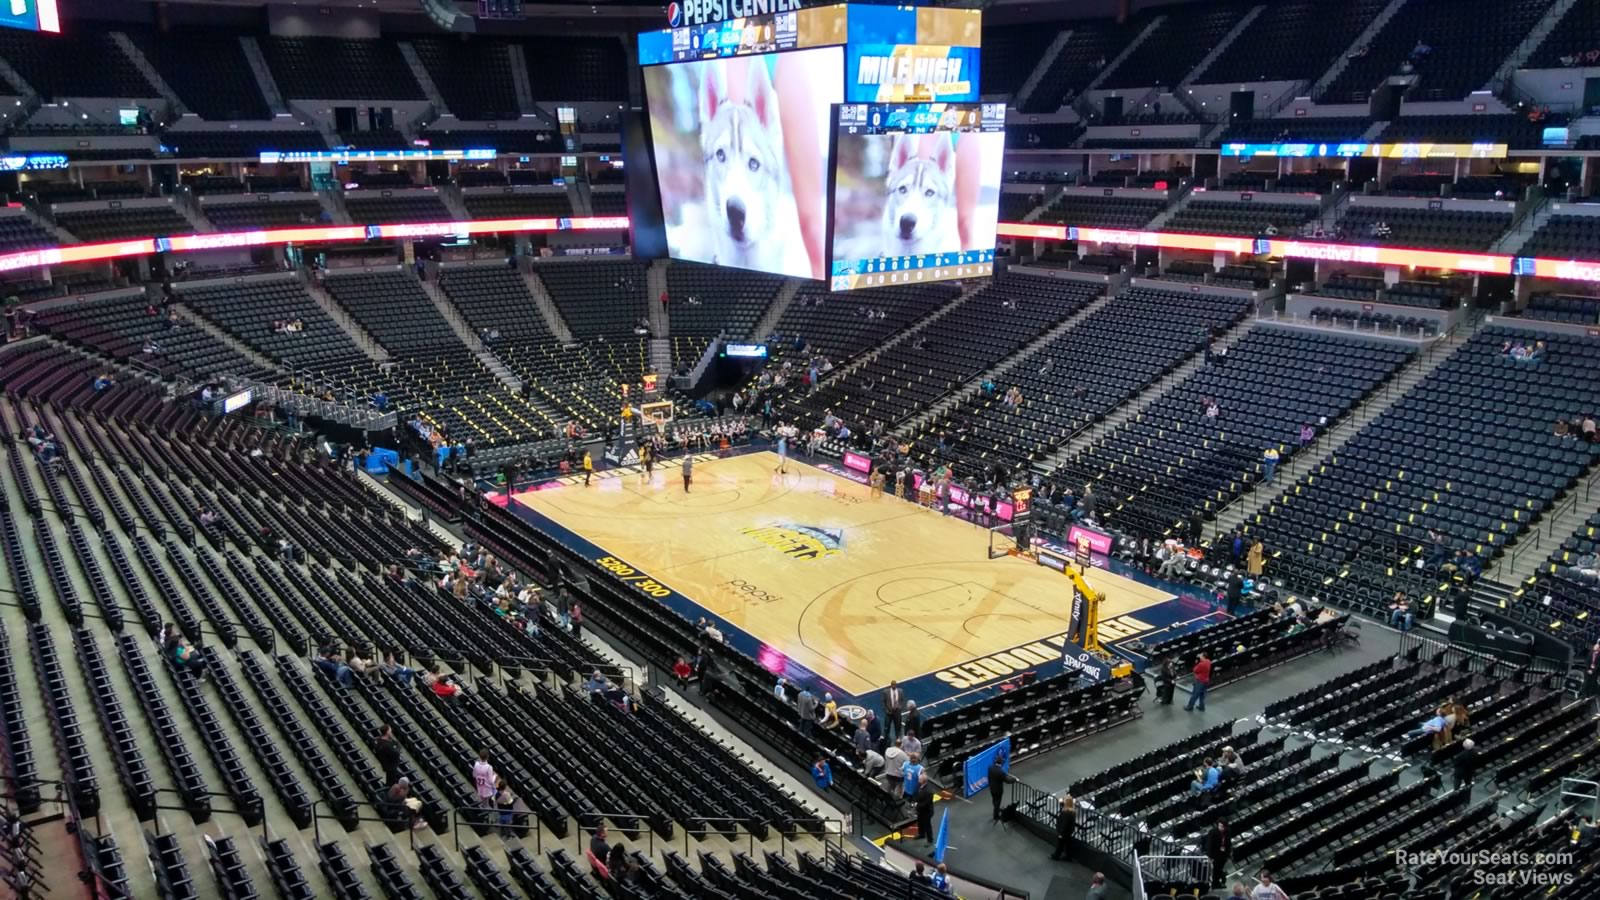 section 331, row 1 seat view  for basketball - ball arena